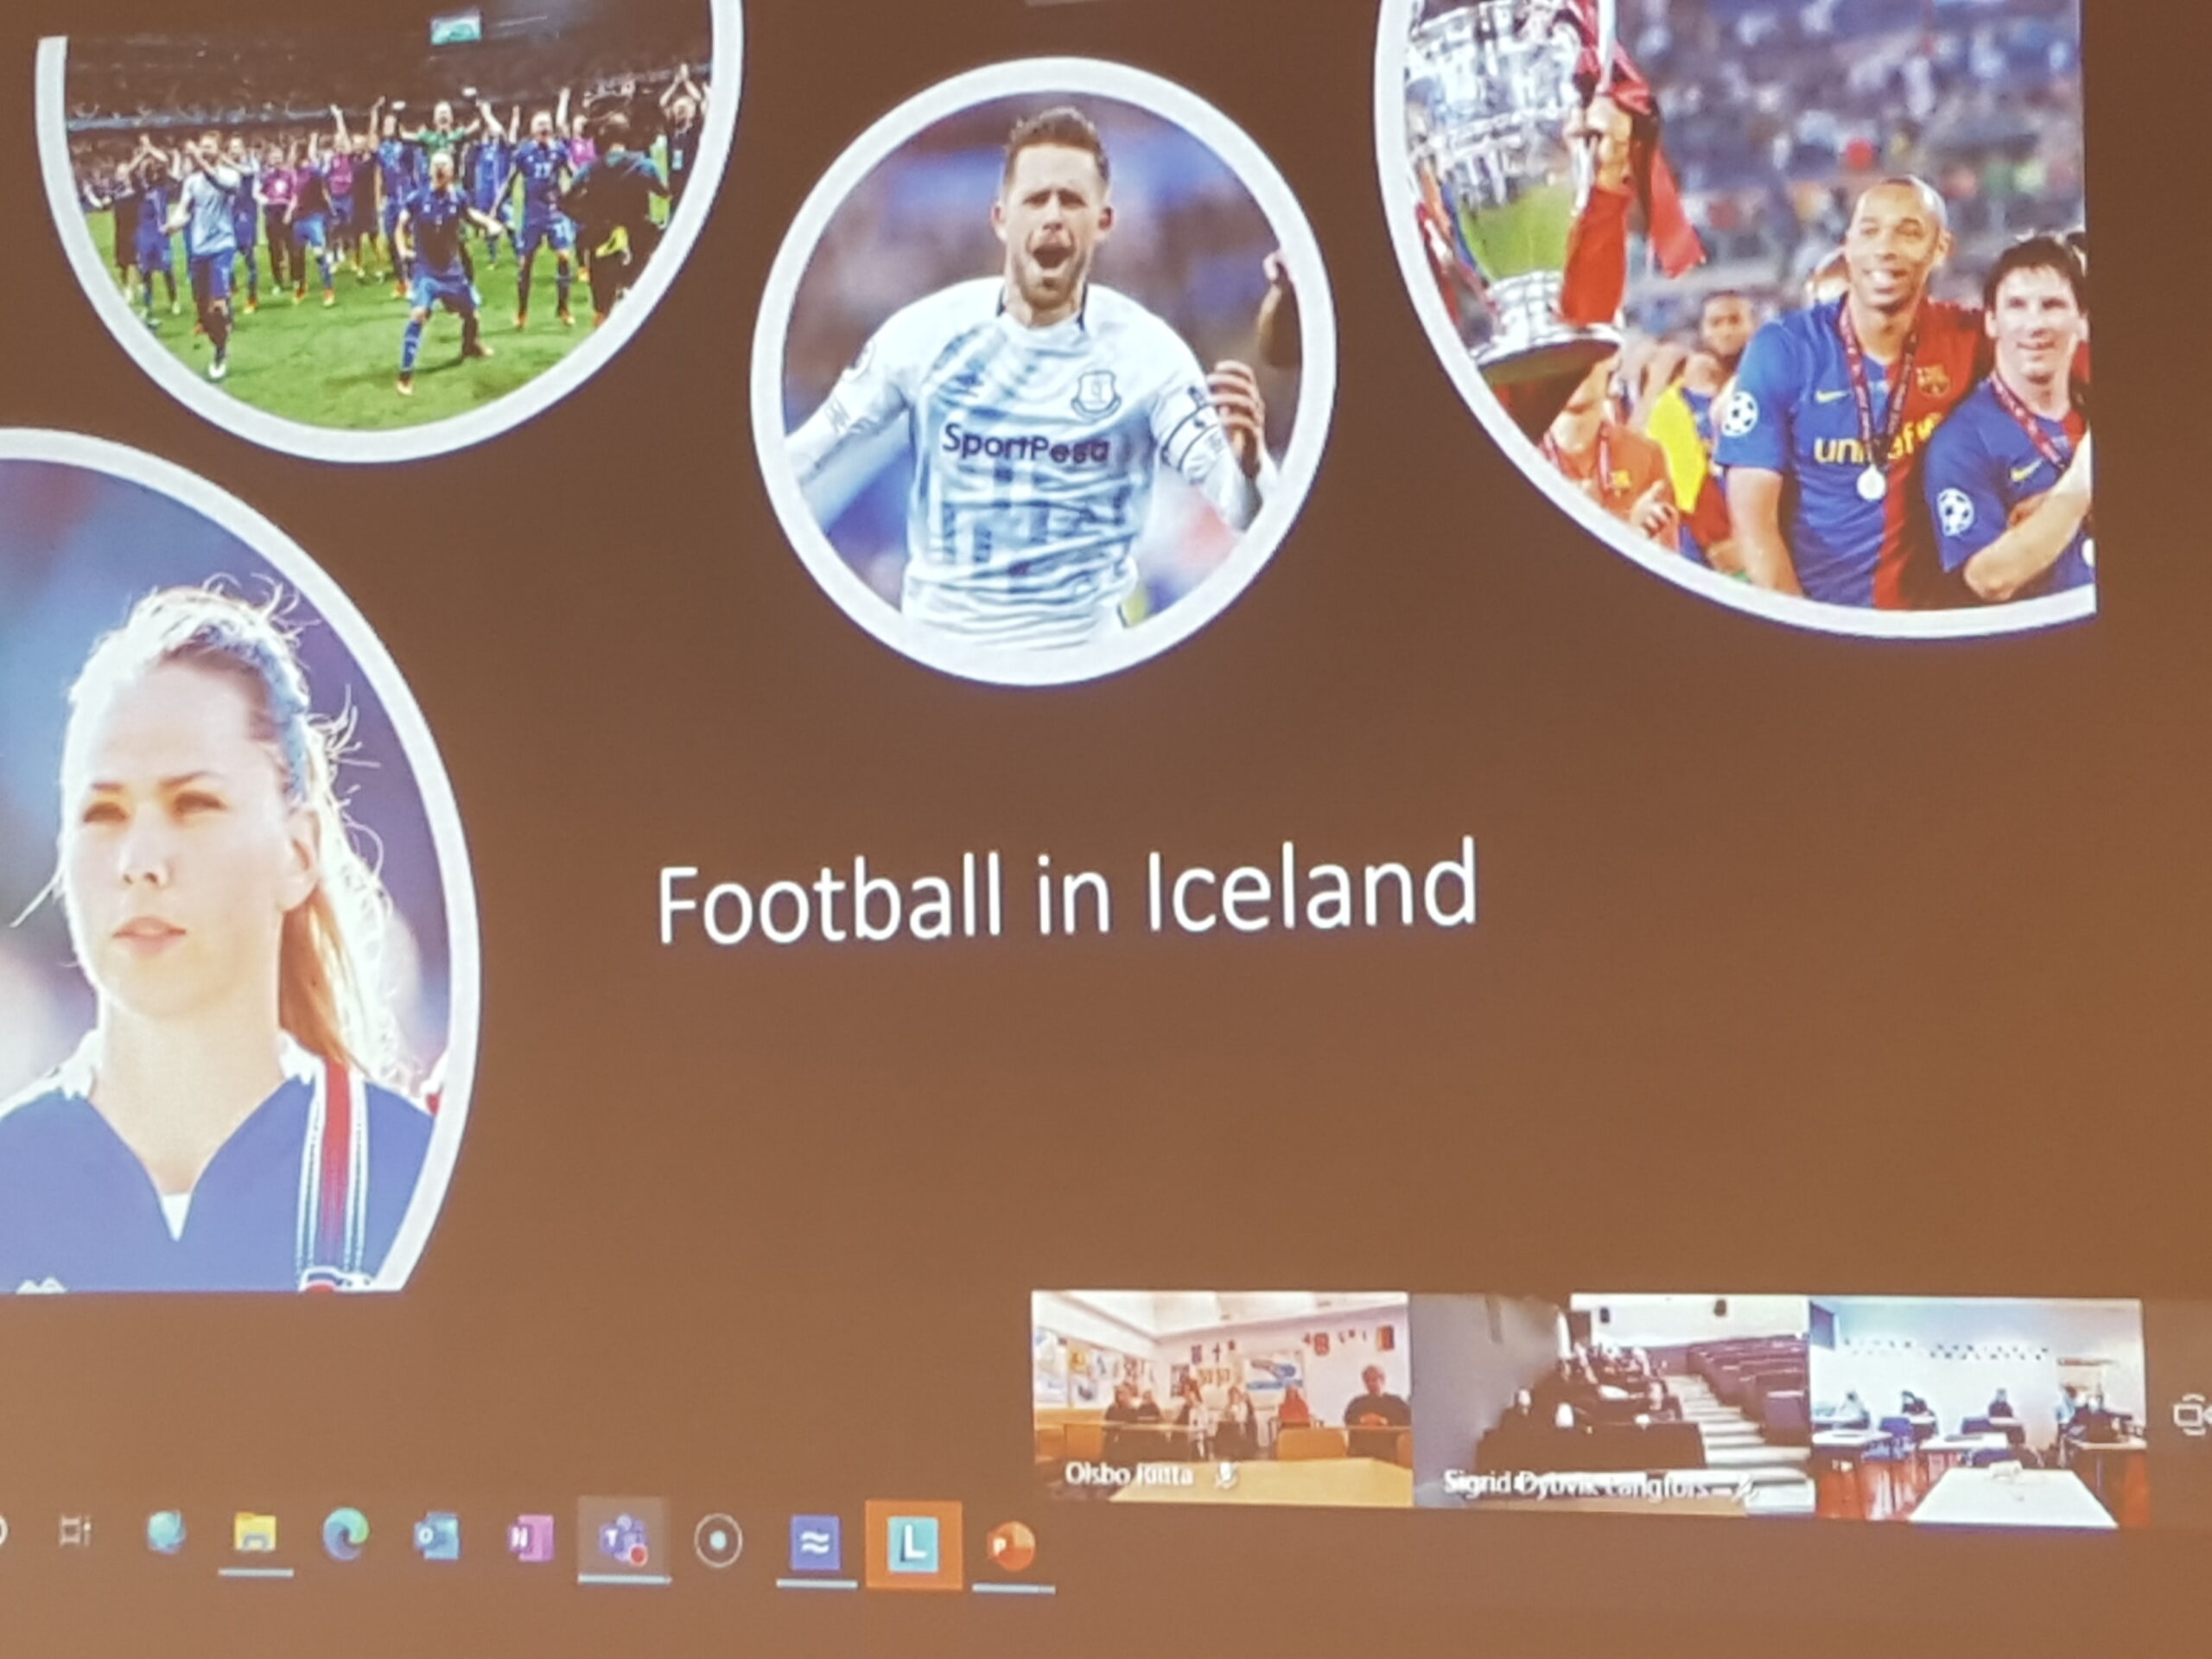 Presentation on Teams about sport in Iceland.